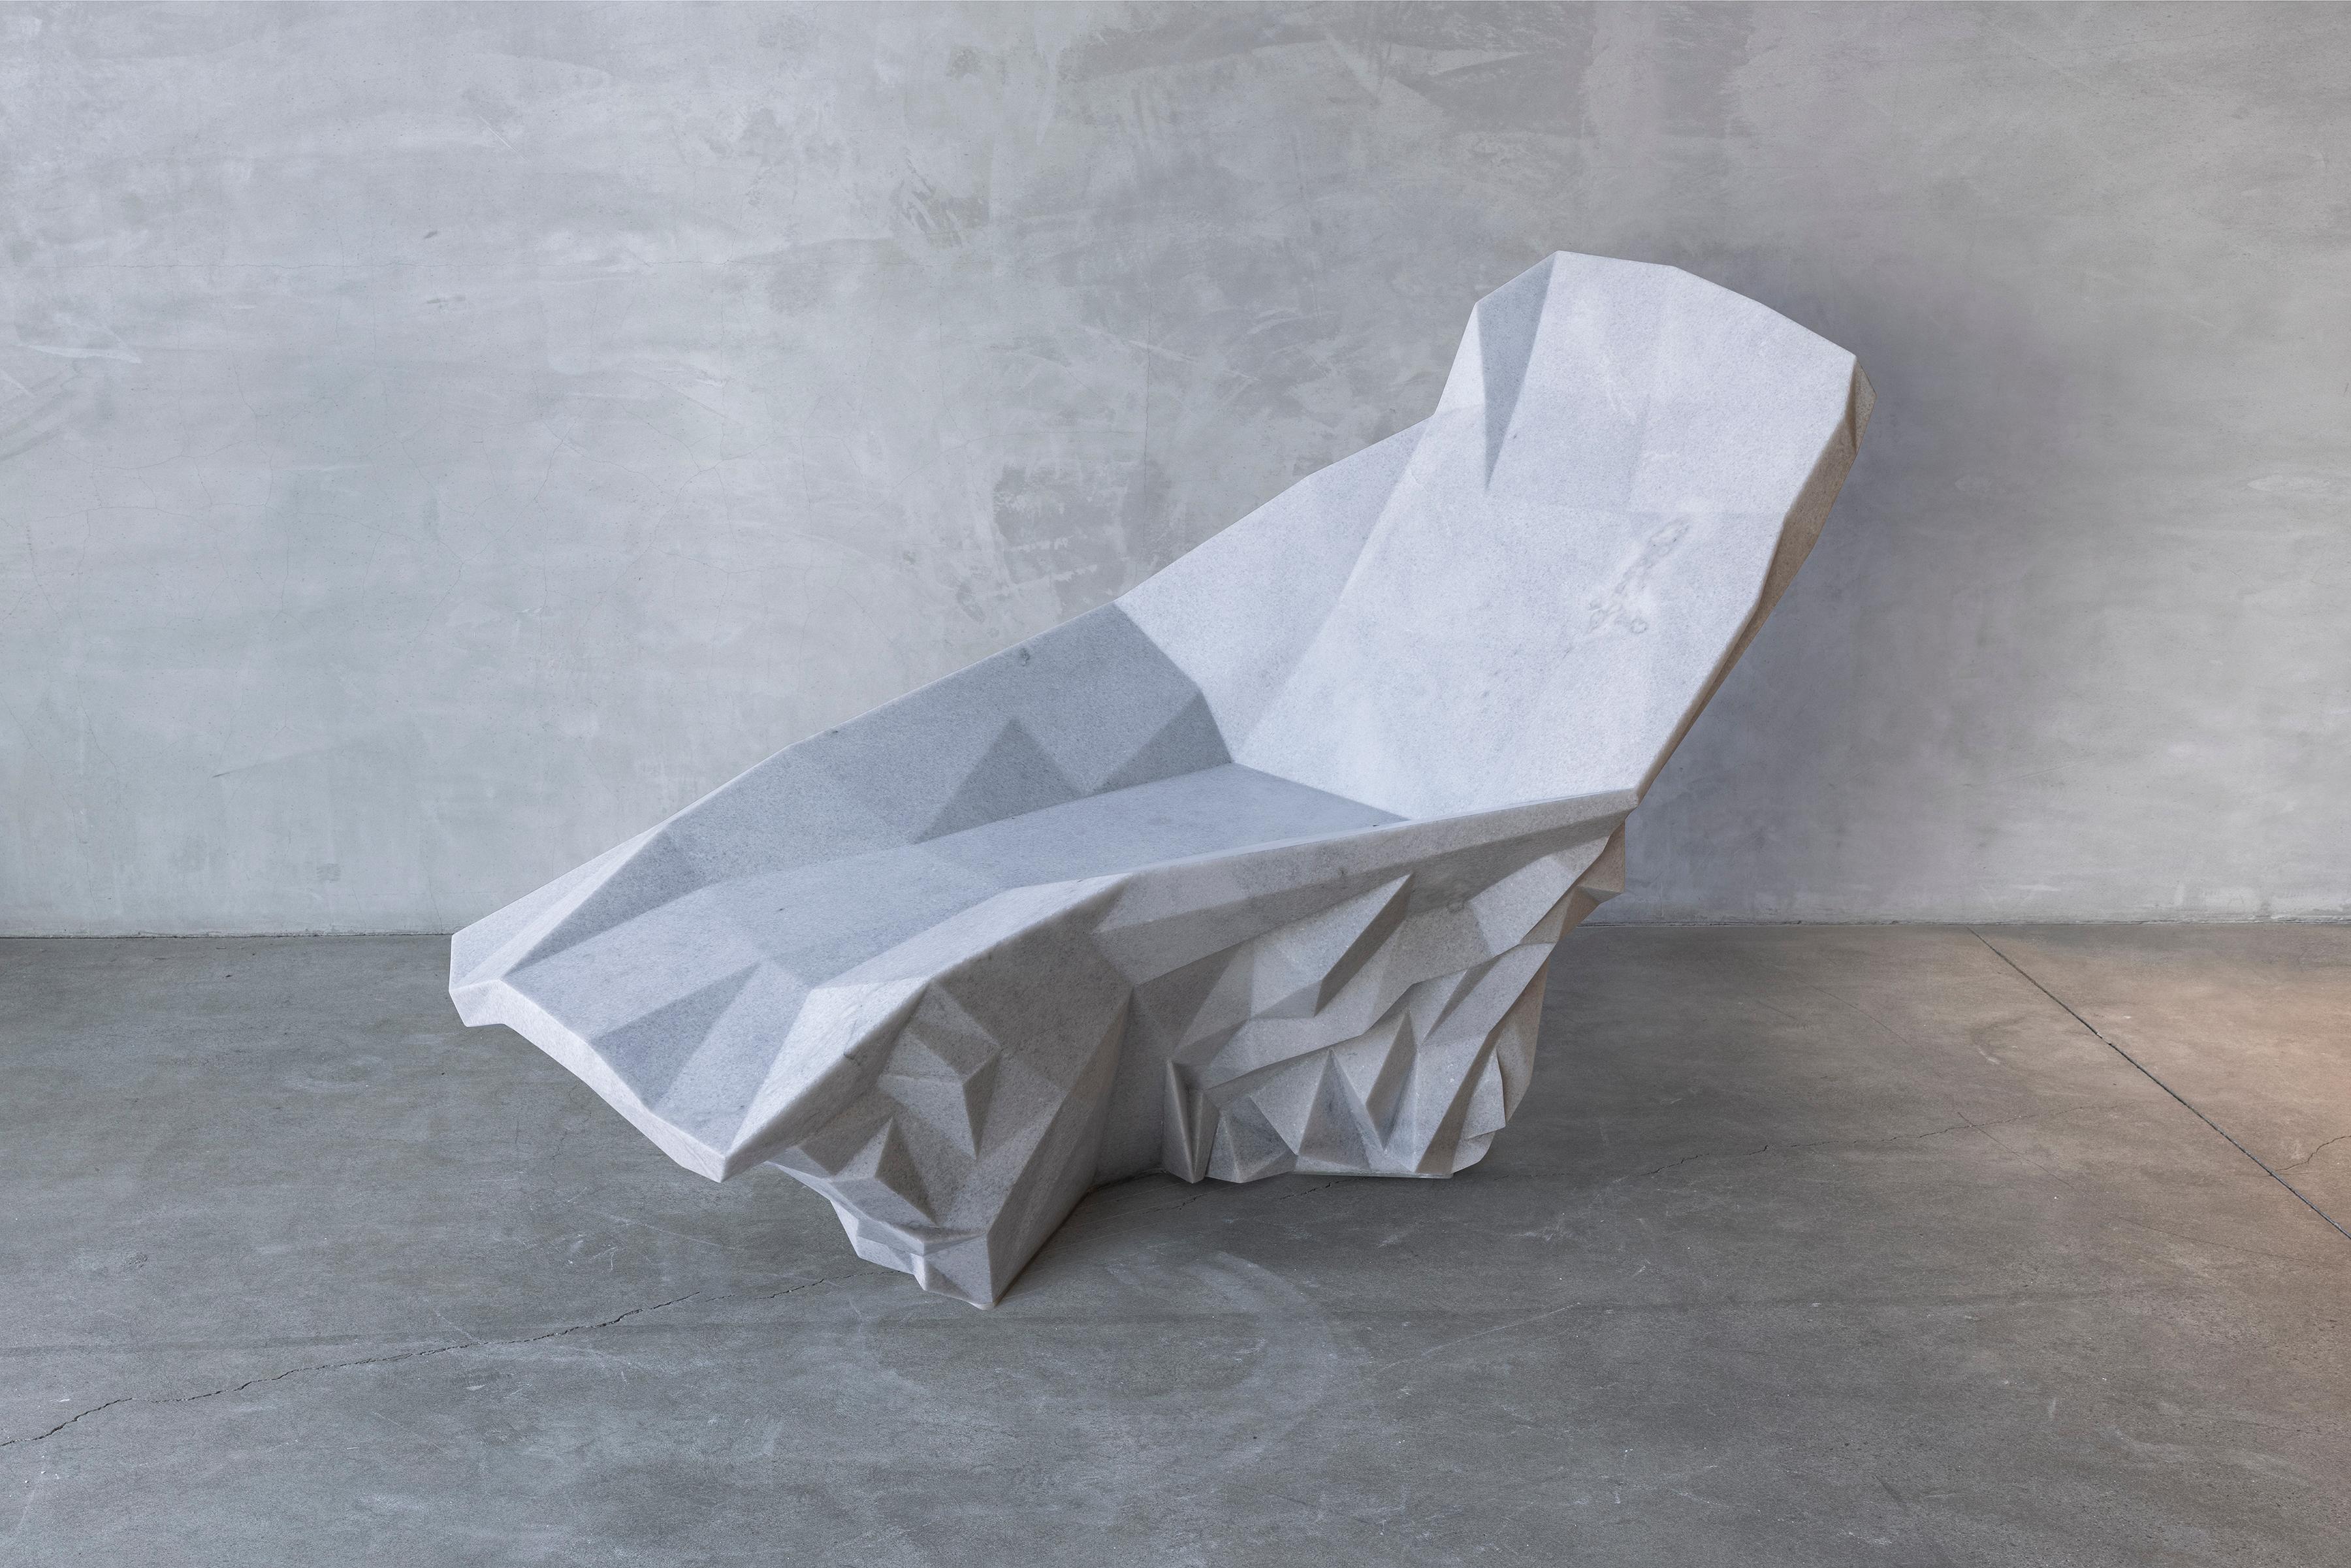 The Berg Chair by William Emmerson
Limited Edition Of 2 Pieces.
Dimensions: D 36,5 x W 66,5 x H 39 cm.
Materials: Naxos marble.
 
A shape. A floating mass of white marble turned into a piece of functional sculpture representing the beauty behind